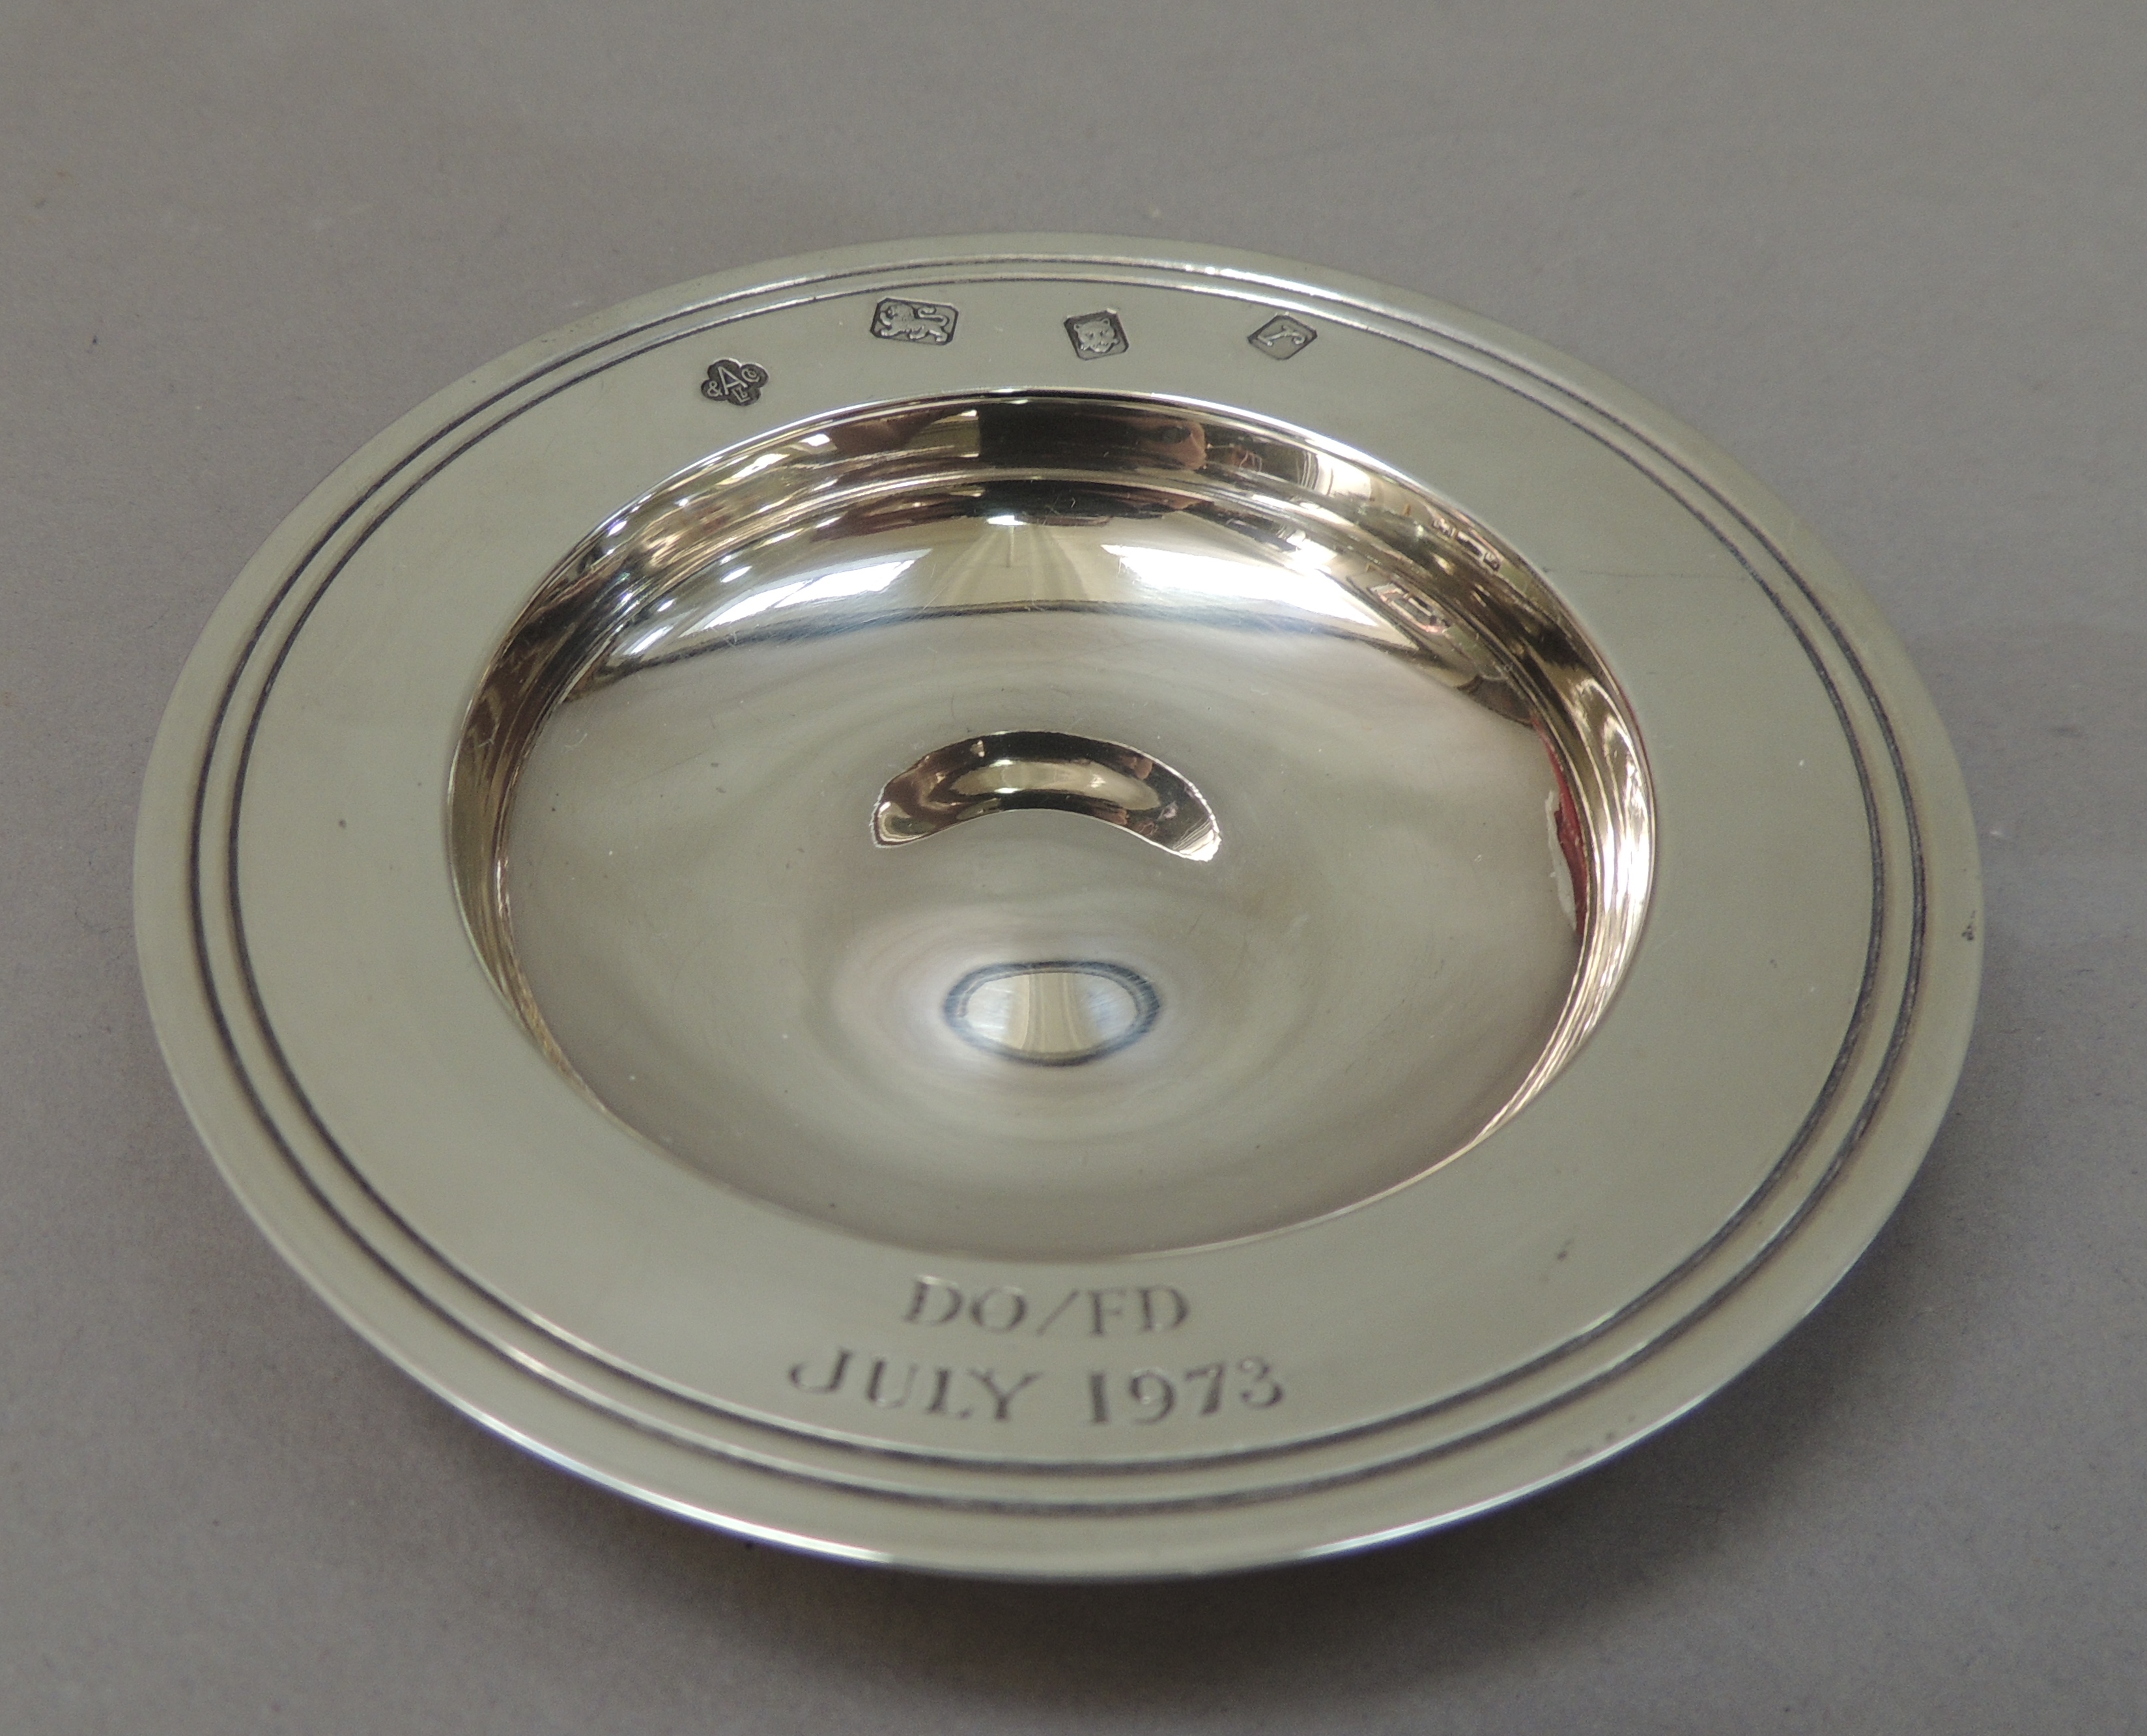 A reproduction silver armada dish, the rim engraved and dated July 1973 by Asprey and Co London - Image 2 of 2